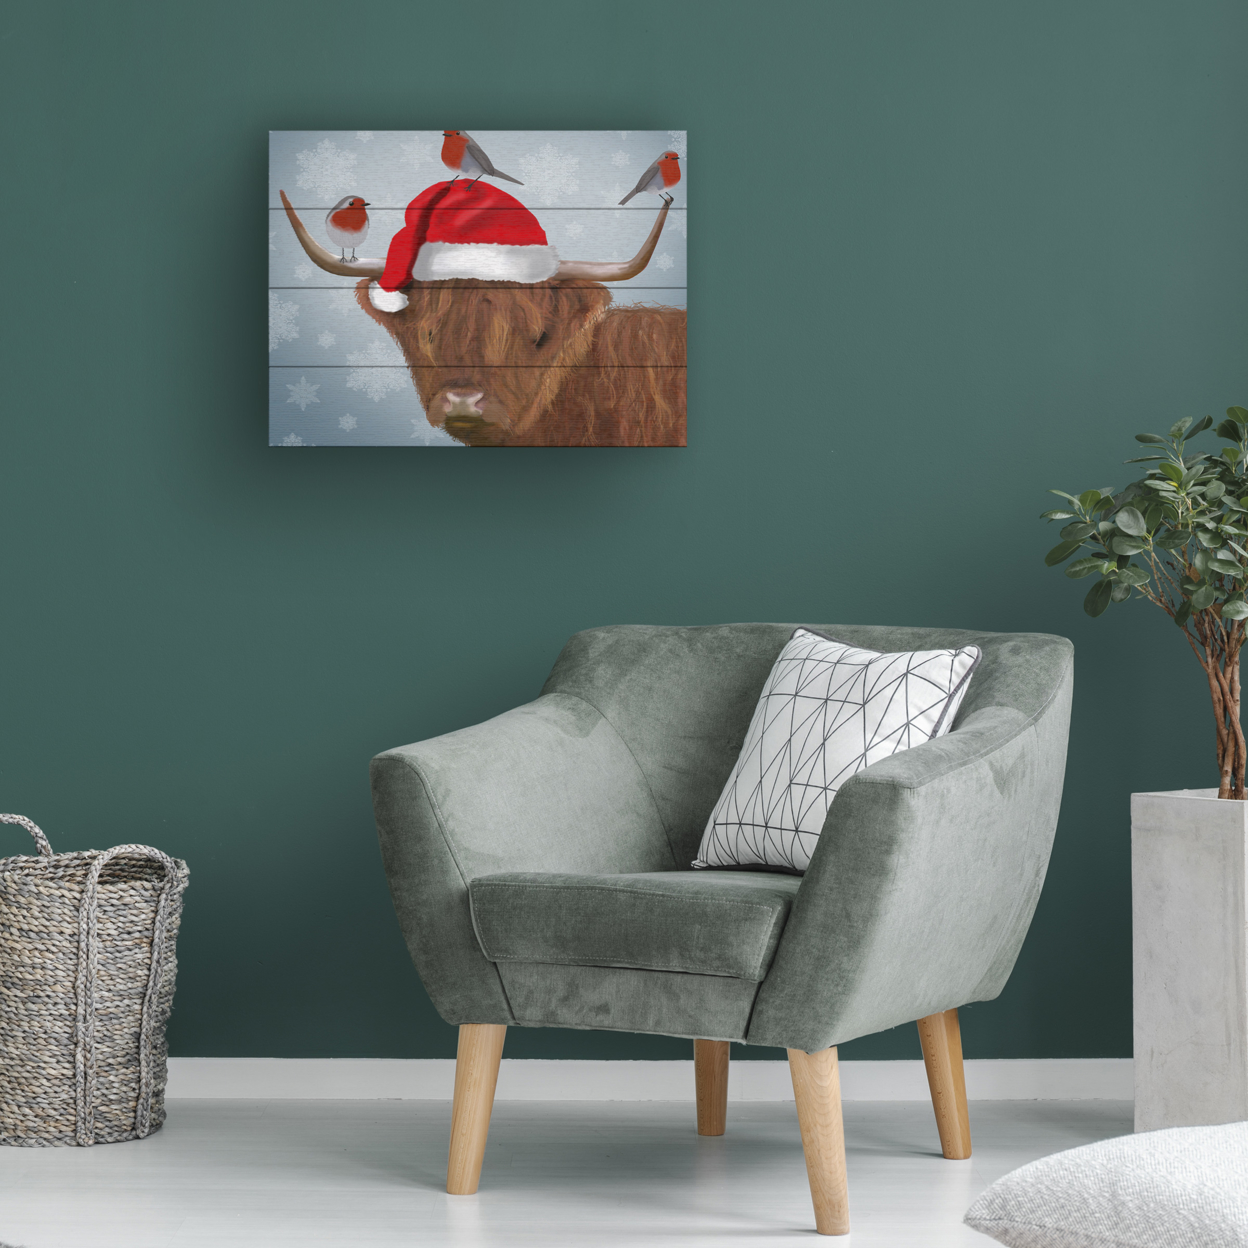 Wall Art 12 X 16 Inches Titled Highland Cow And Robins Ready To Hang Printed On Wooden Planks